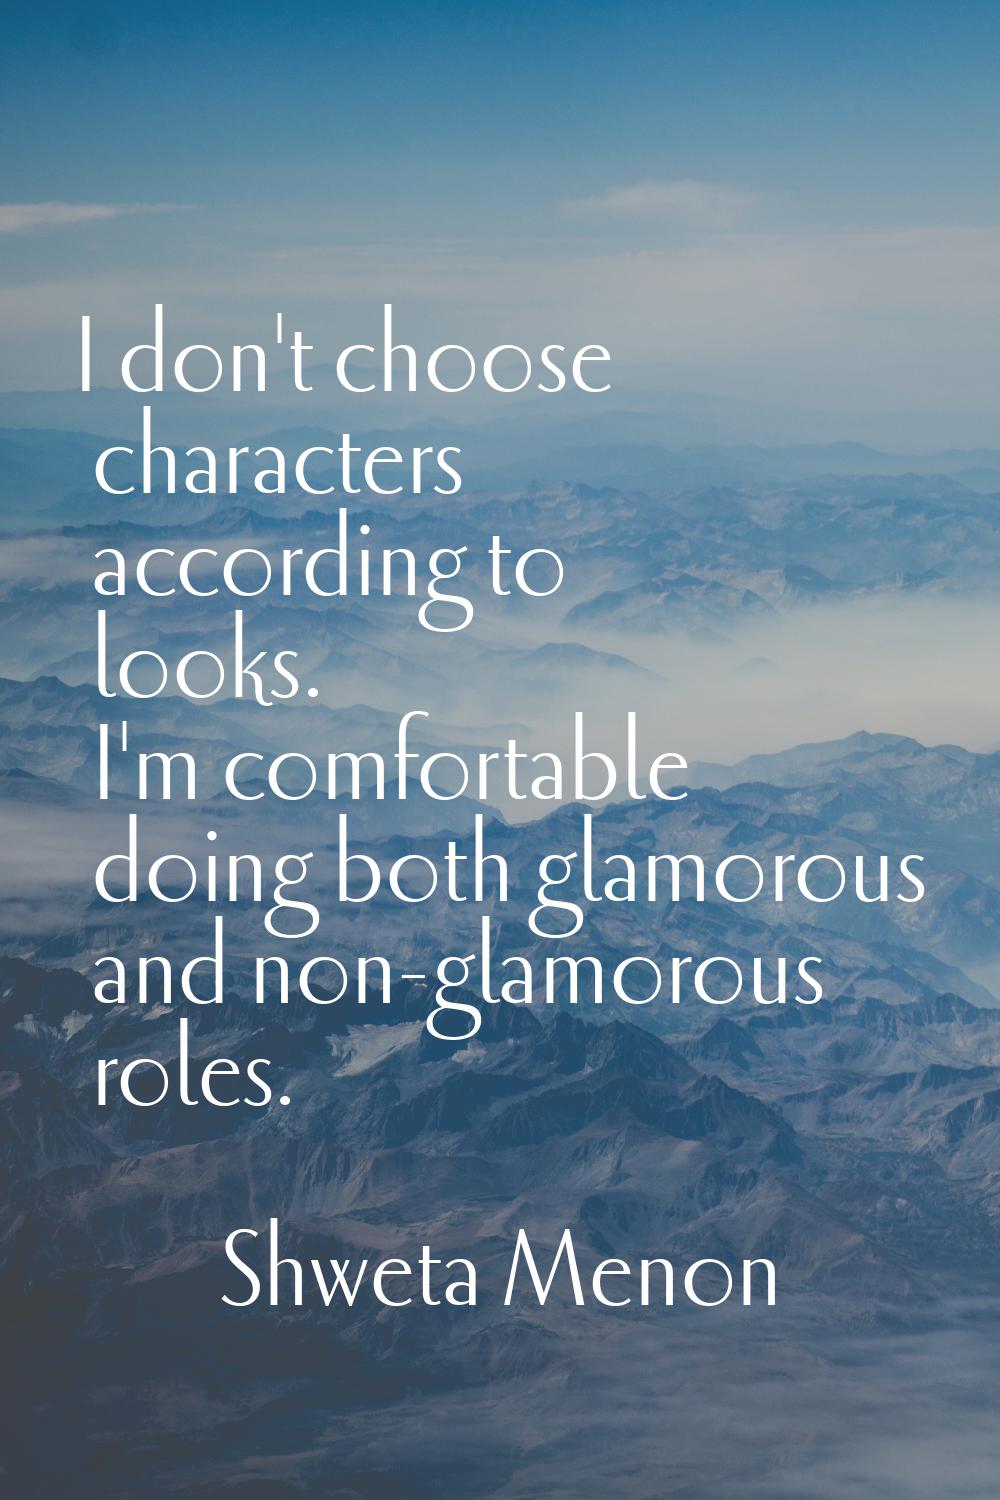 I don't choose characters according to looks. I'm comfortable doing both glamorous and non-glamorou